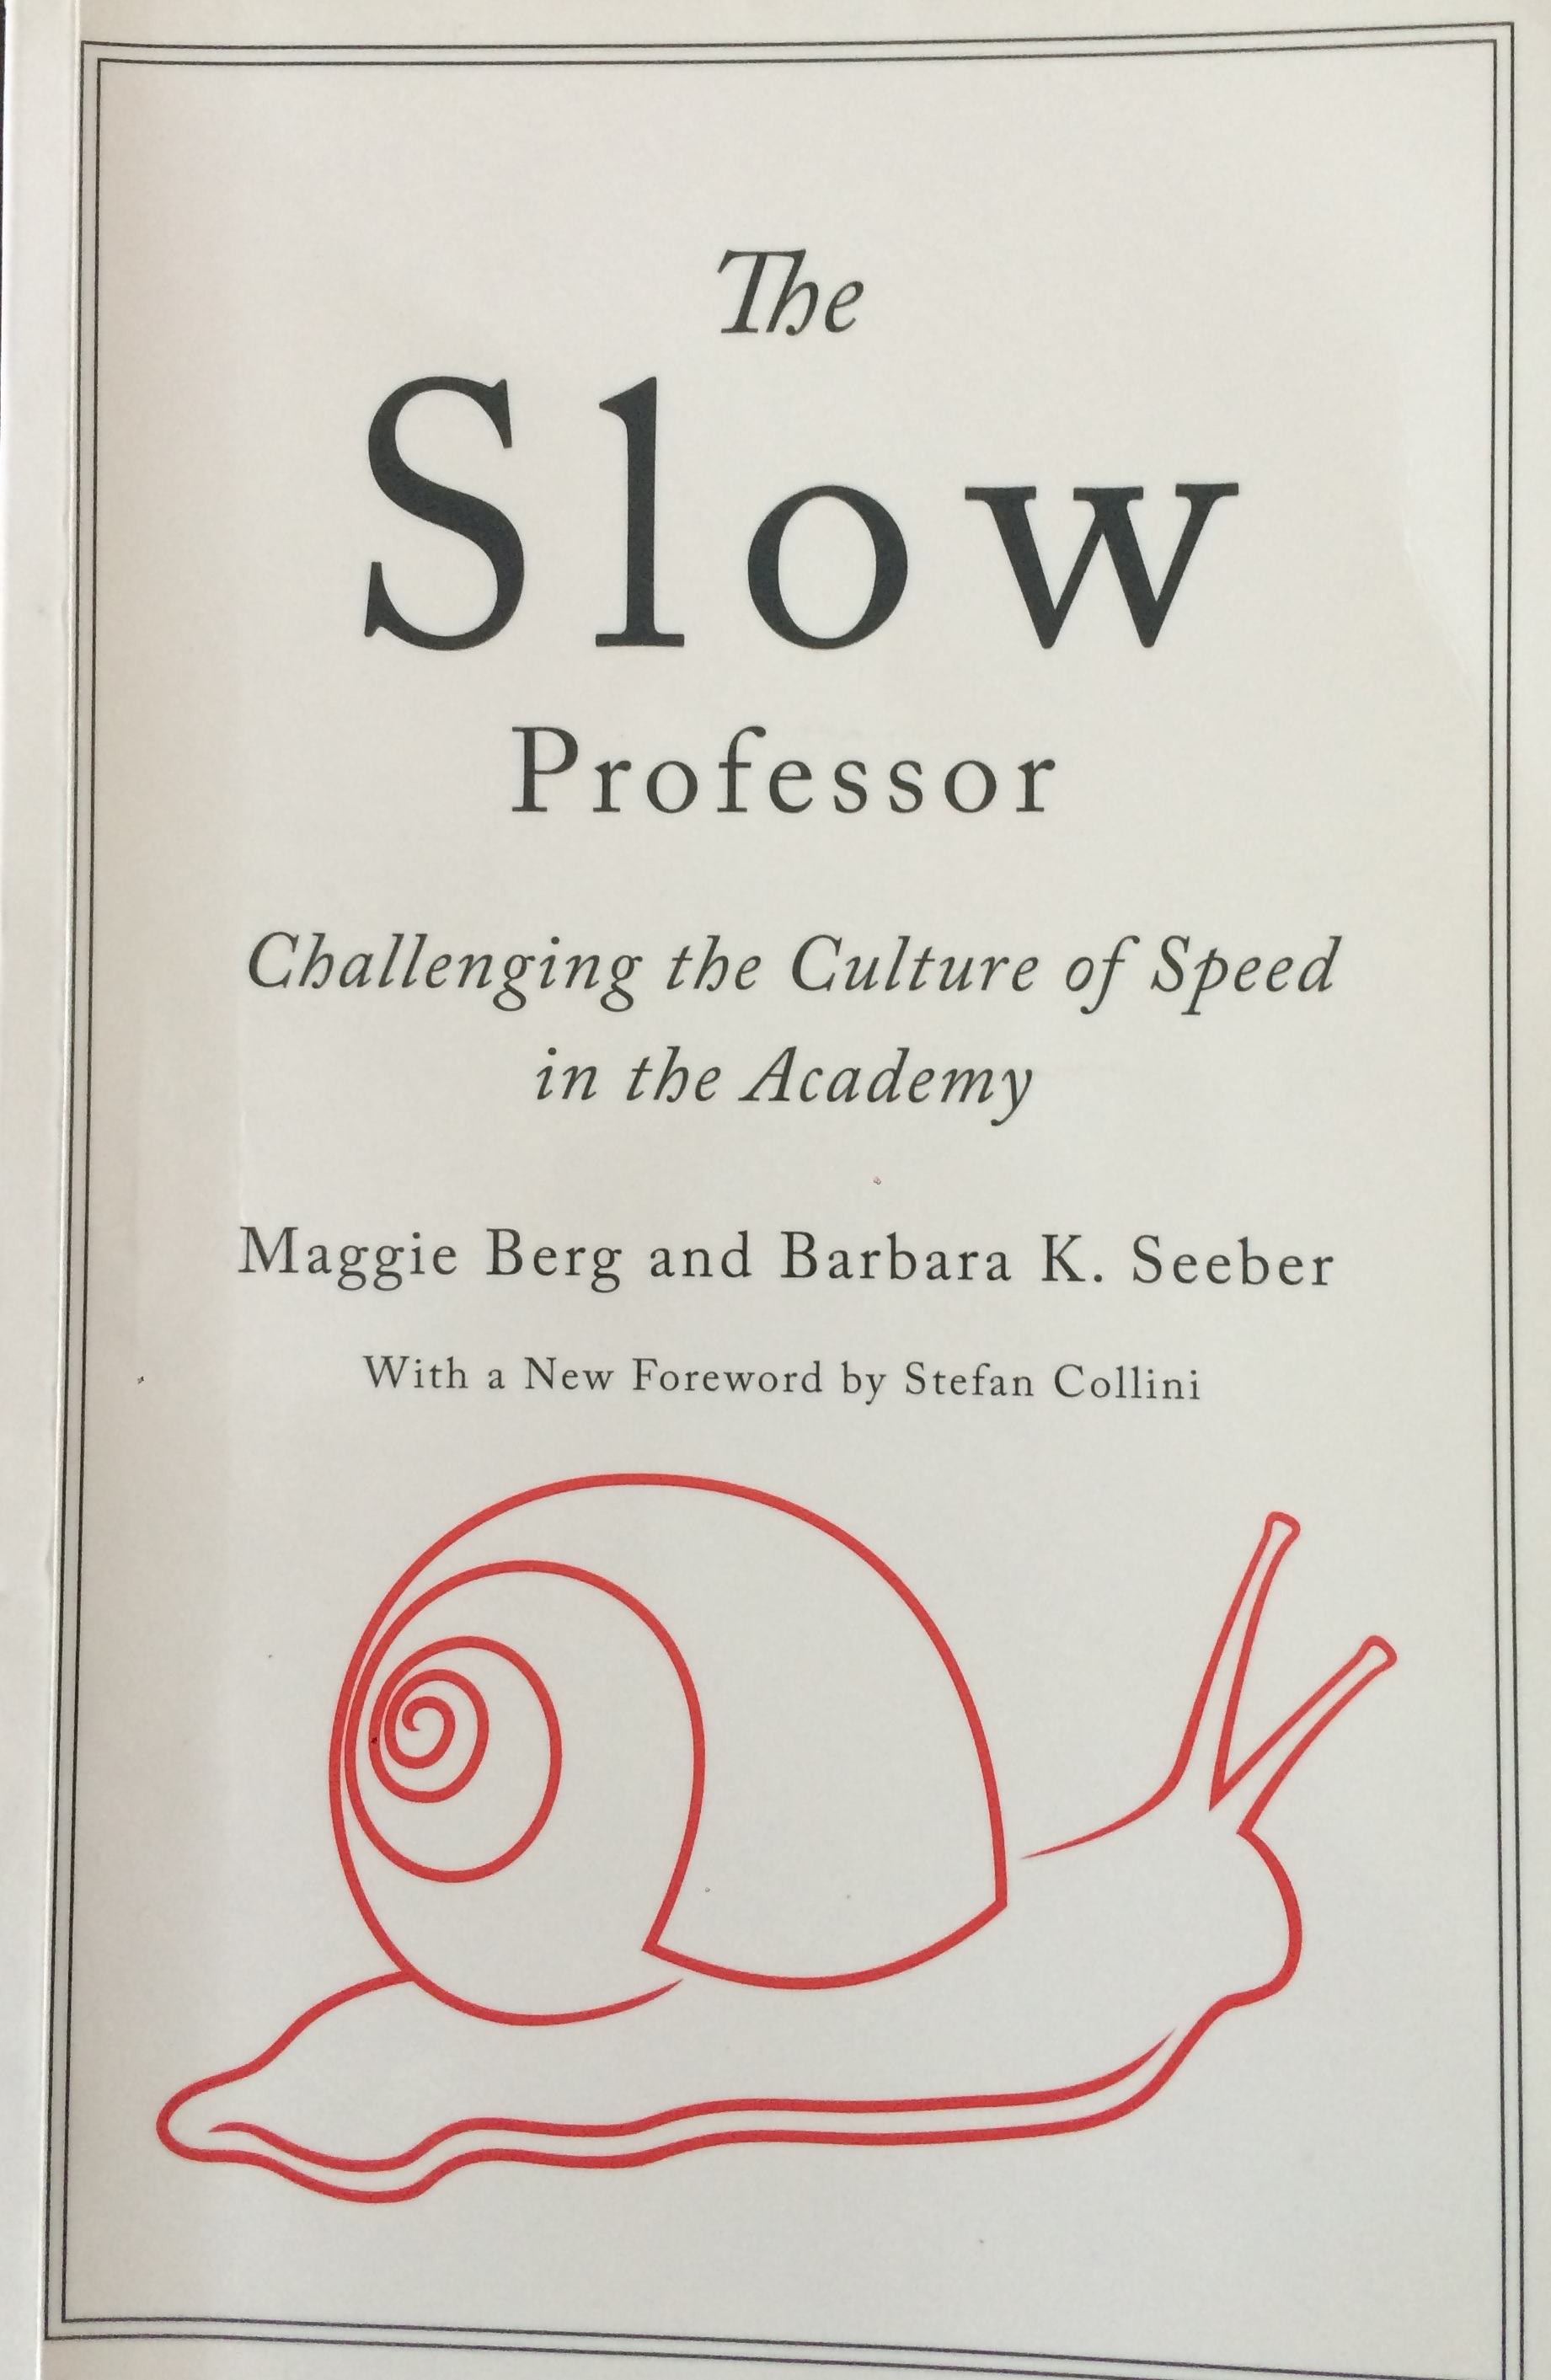 The slow professor: challenging the culture of speed in the Academy